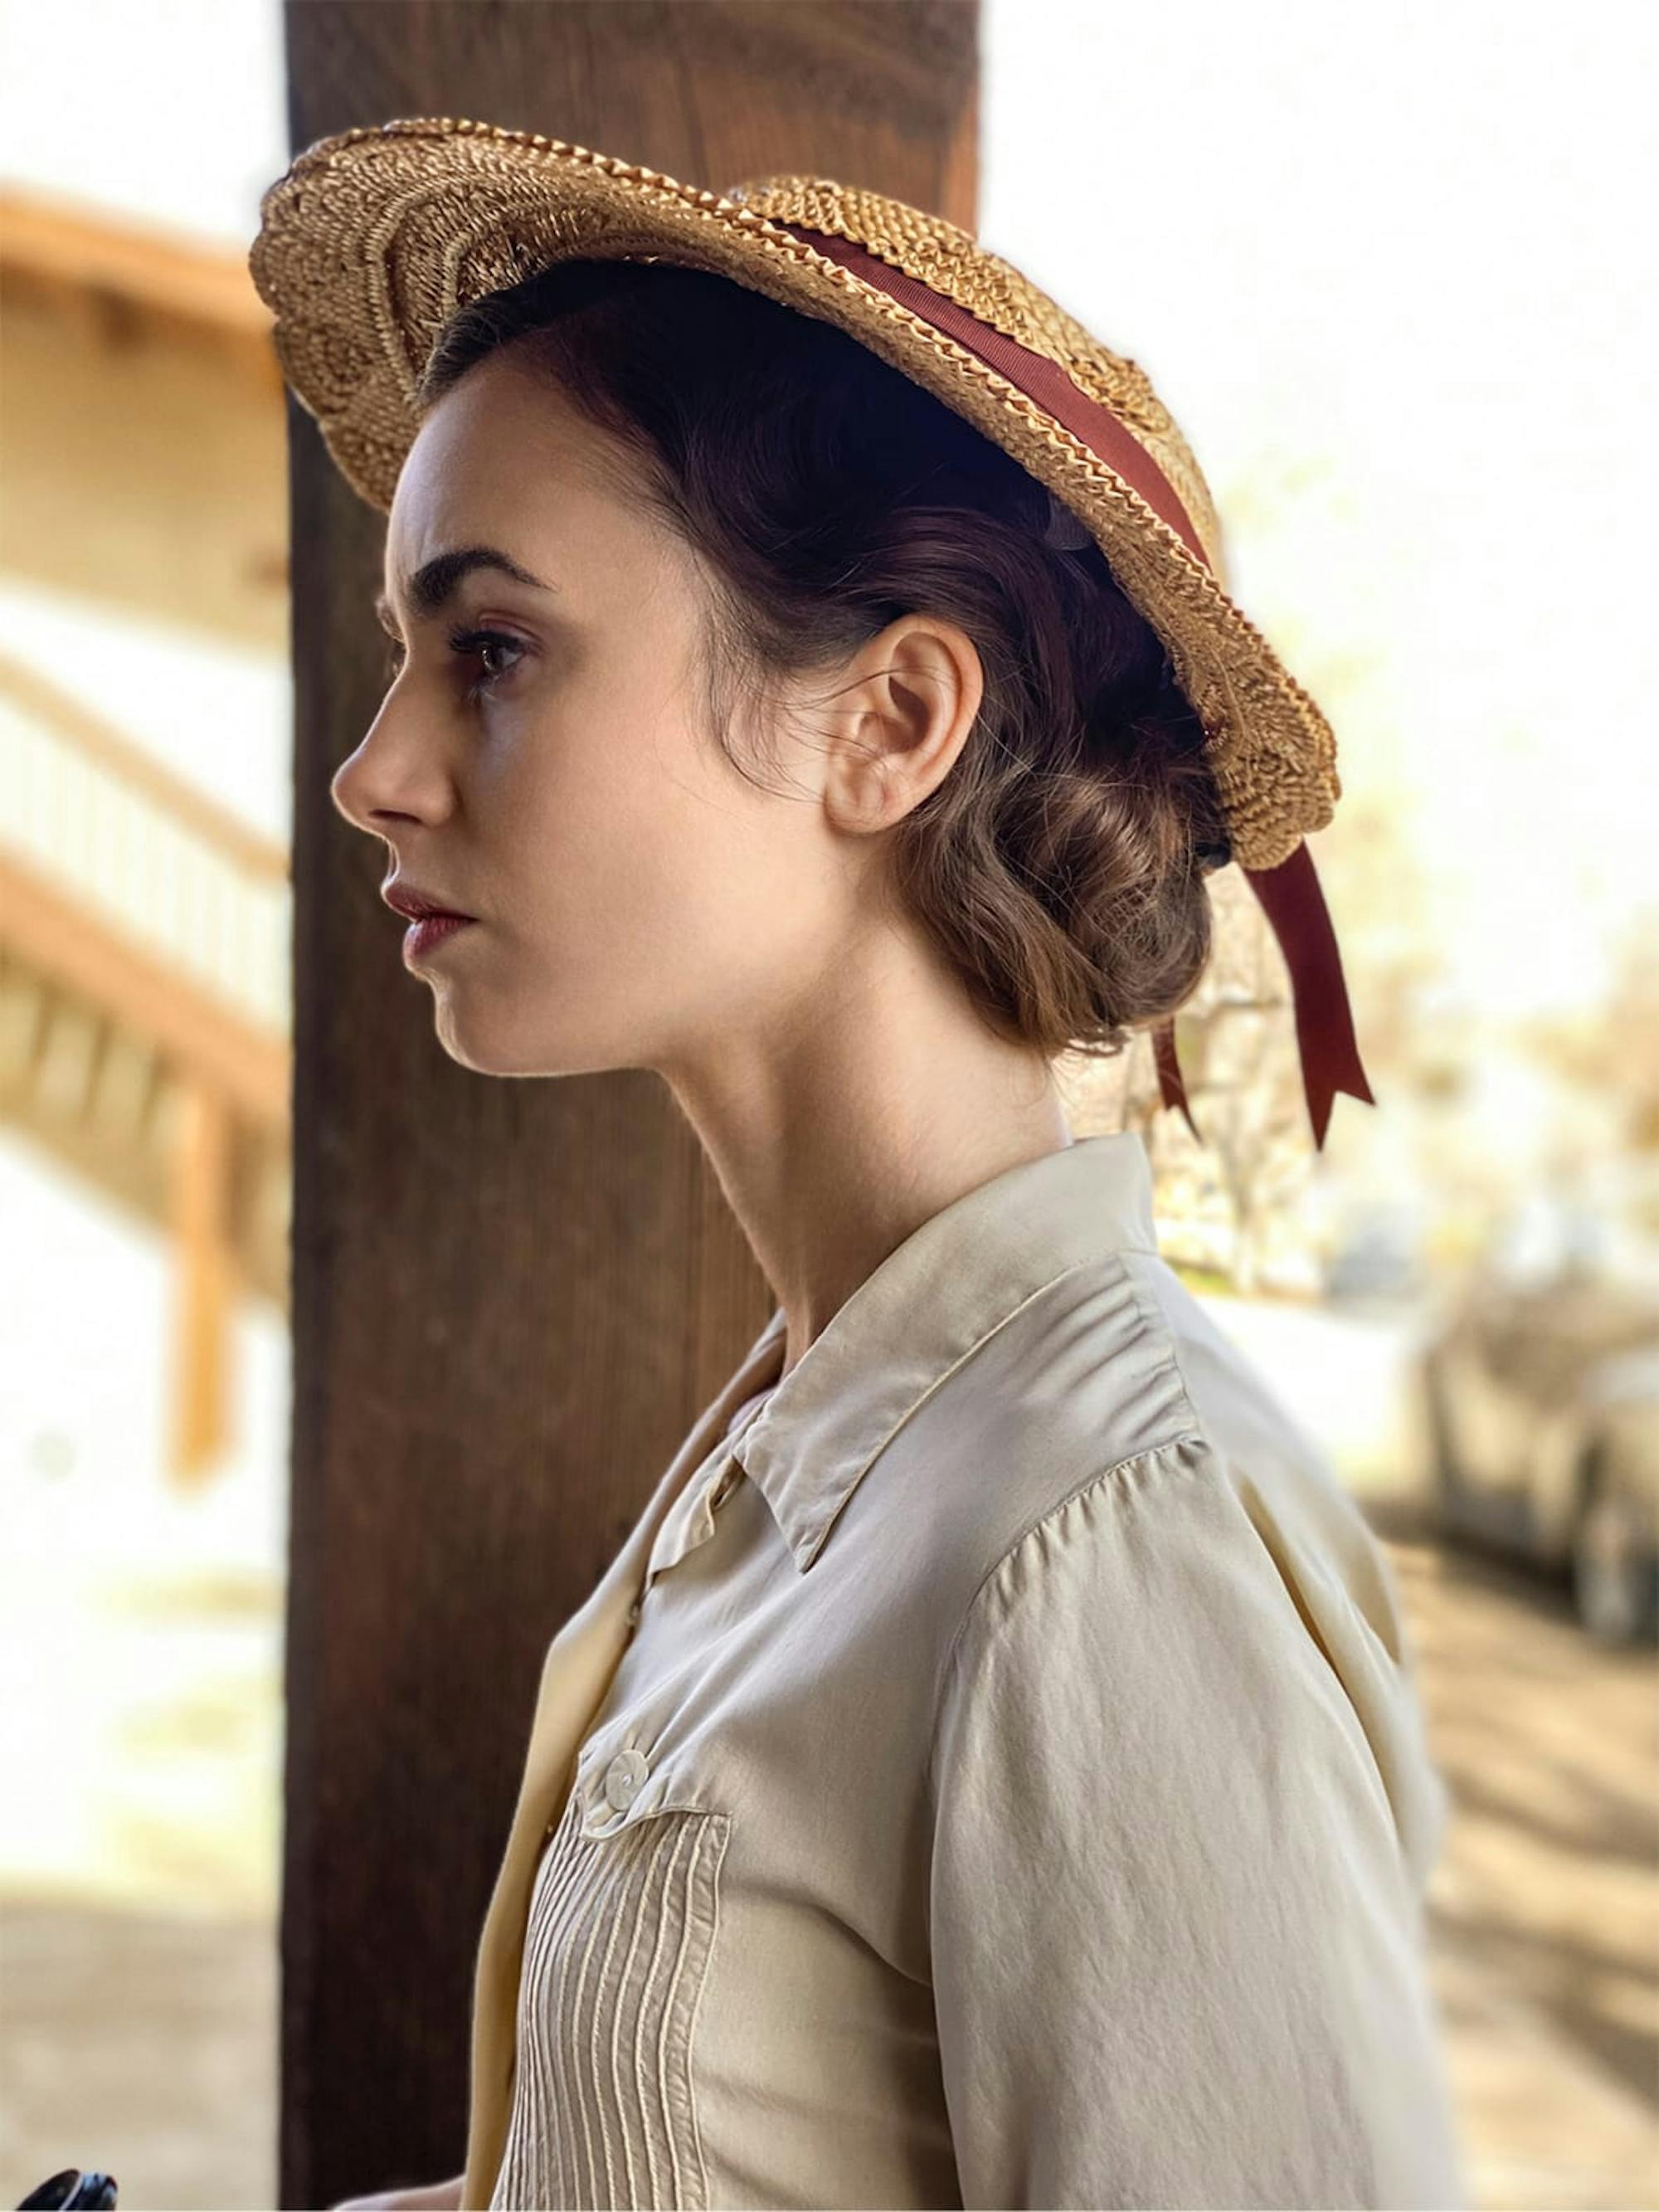 Lily Collins in character wearing a cream blouse and tan sunhat. She’s pictured in the desert light, everything browns and yellows.